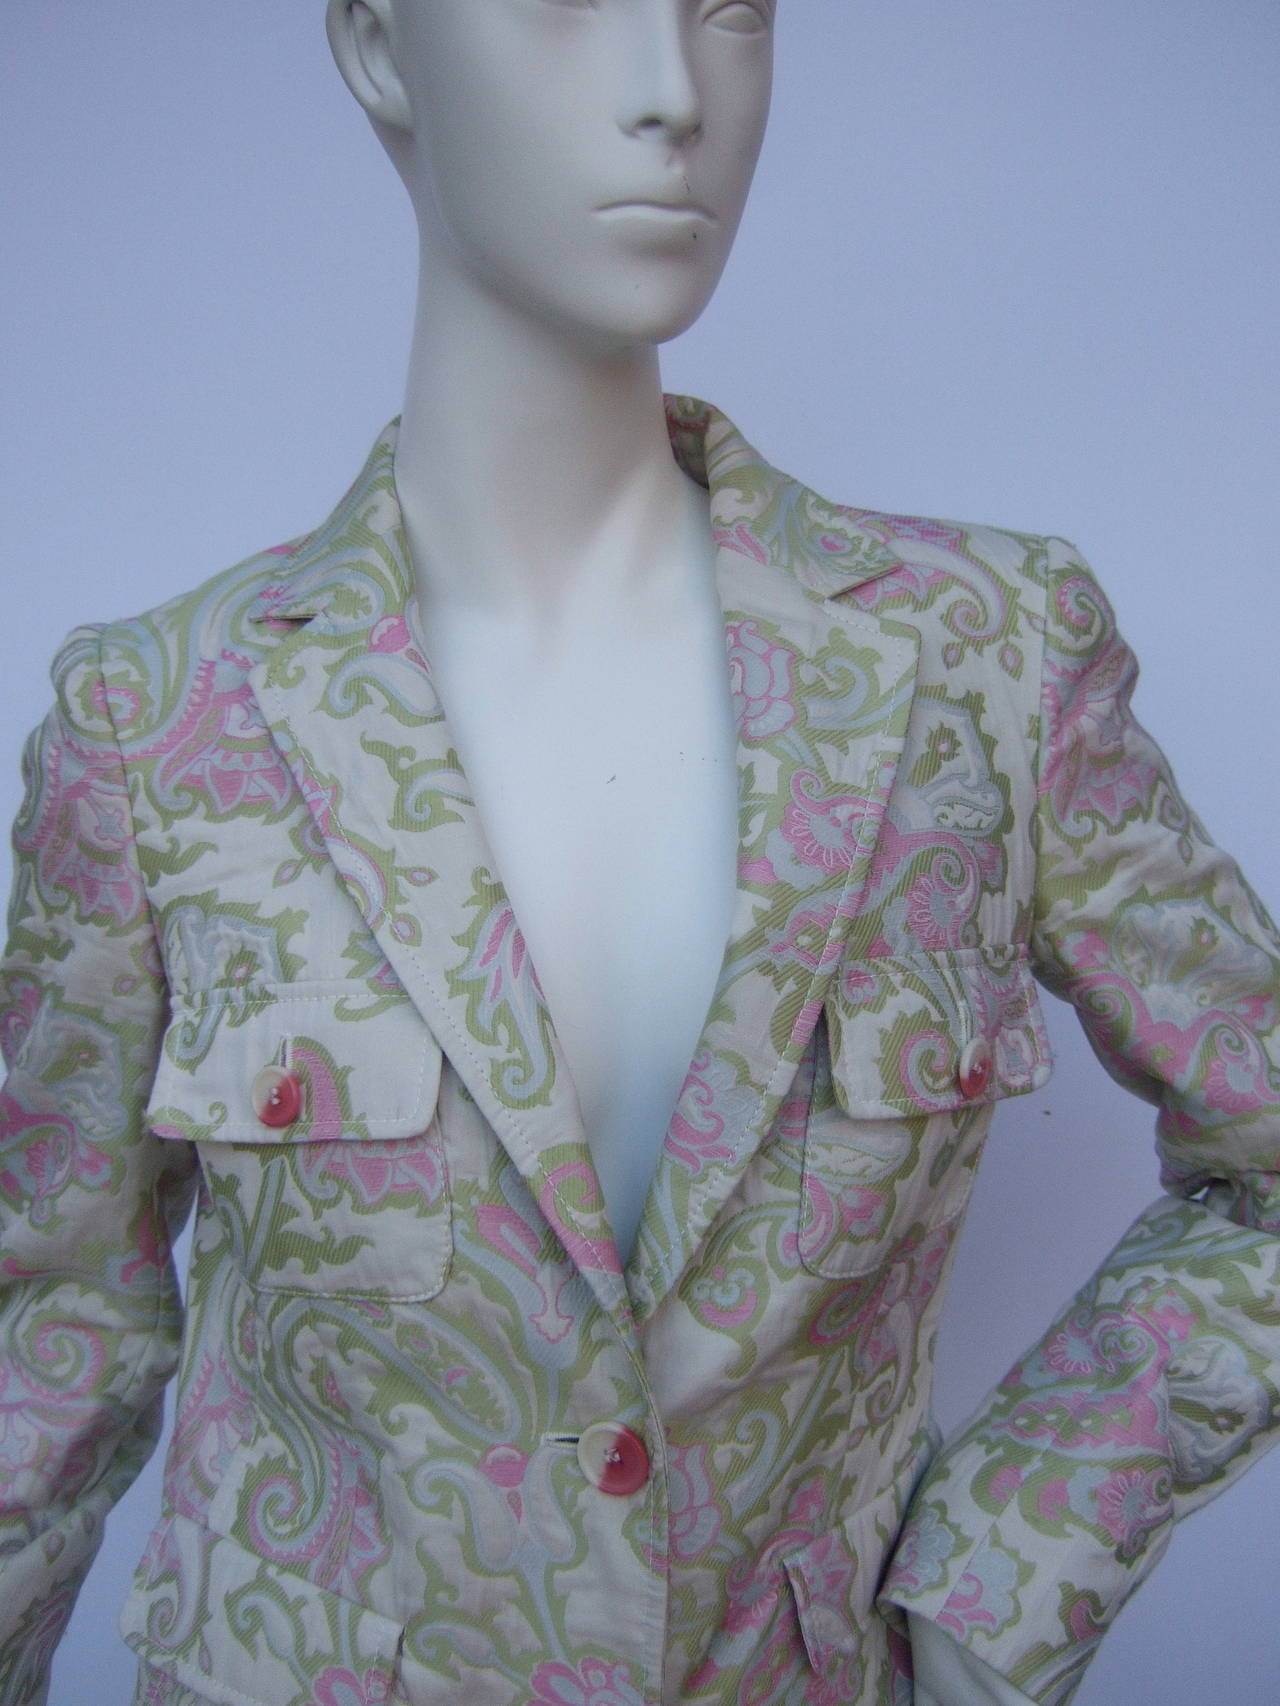 Etro Milano Paisley floral pink & green brocade coat  Made in Italy Size 40
The Italian designer coat is designed with mauve pink & chartreuse green paisley floral designs 

The stylish coat closes with pink & white resin buttons stamped Etro